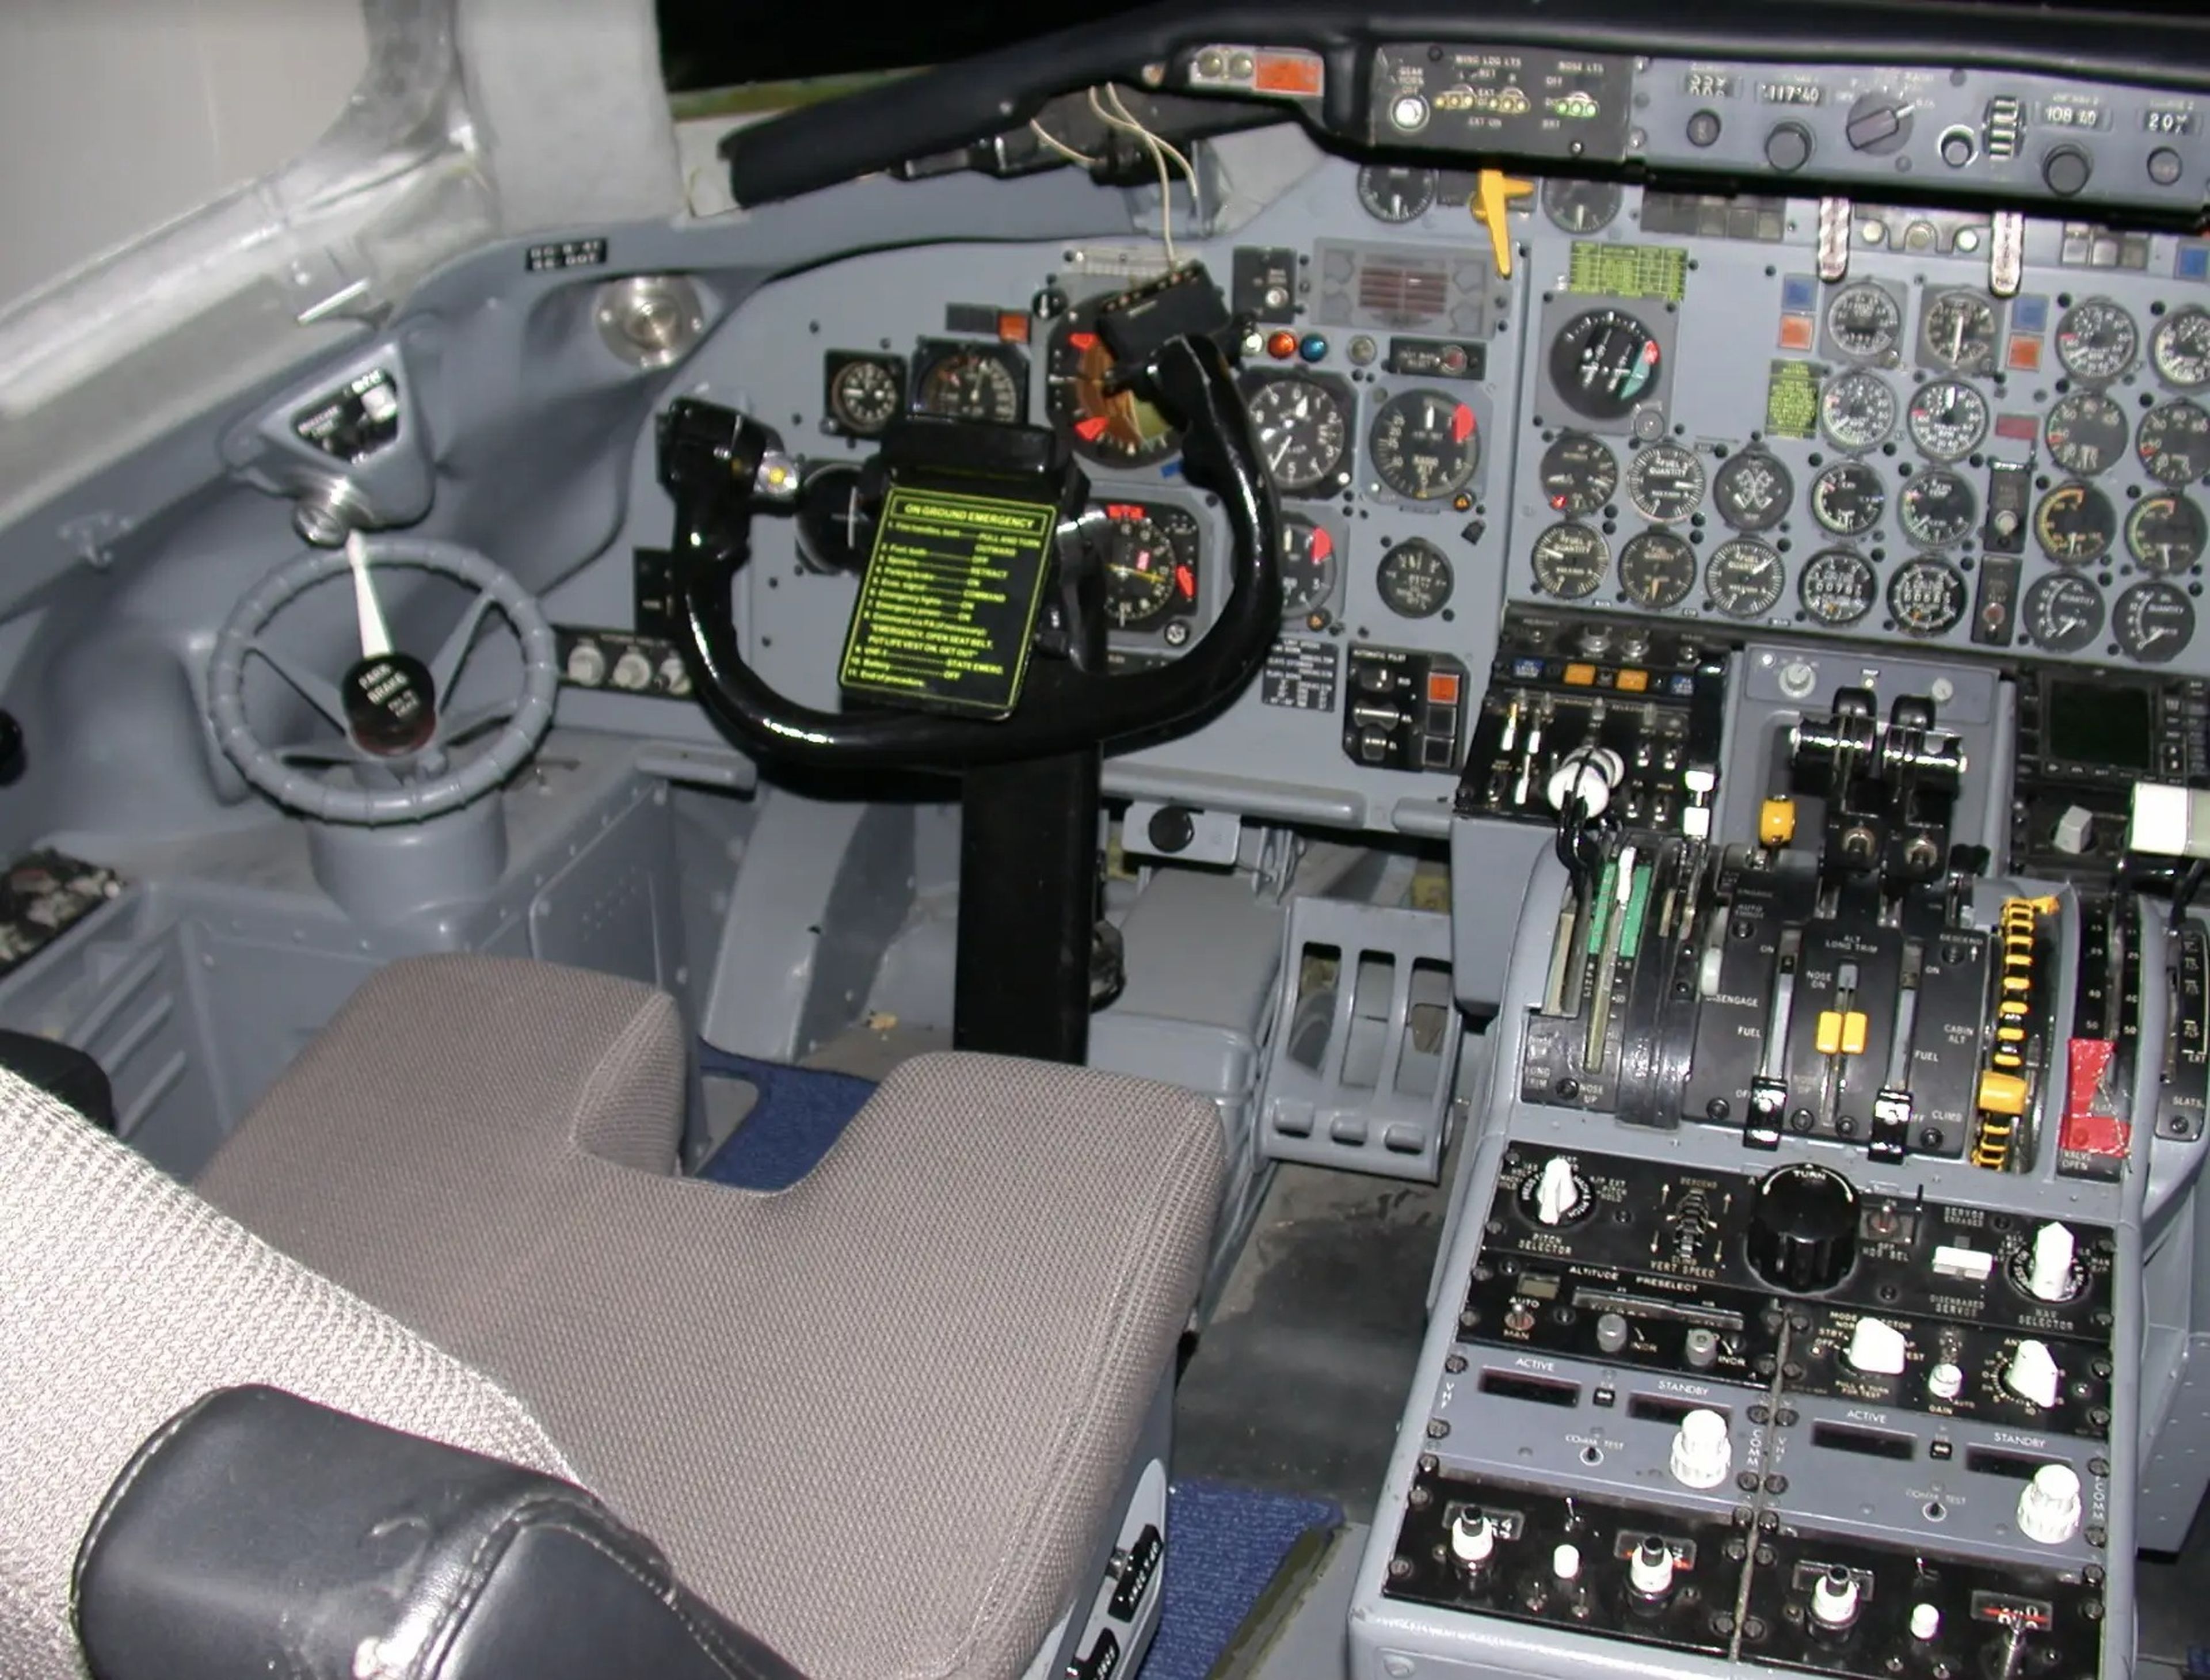 DC-9 Spirit Airlines fully restored cockpit to reflect the plane’s original 1970s interior